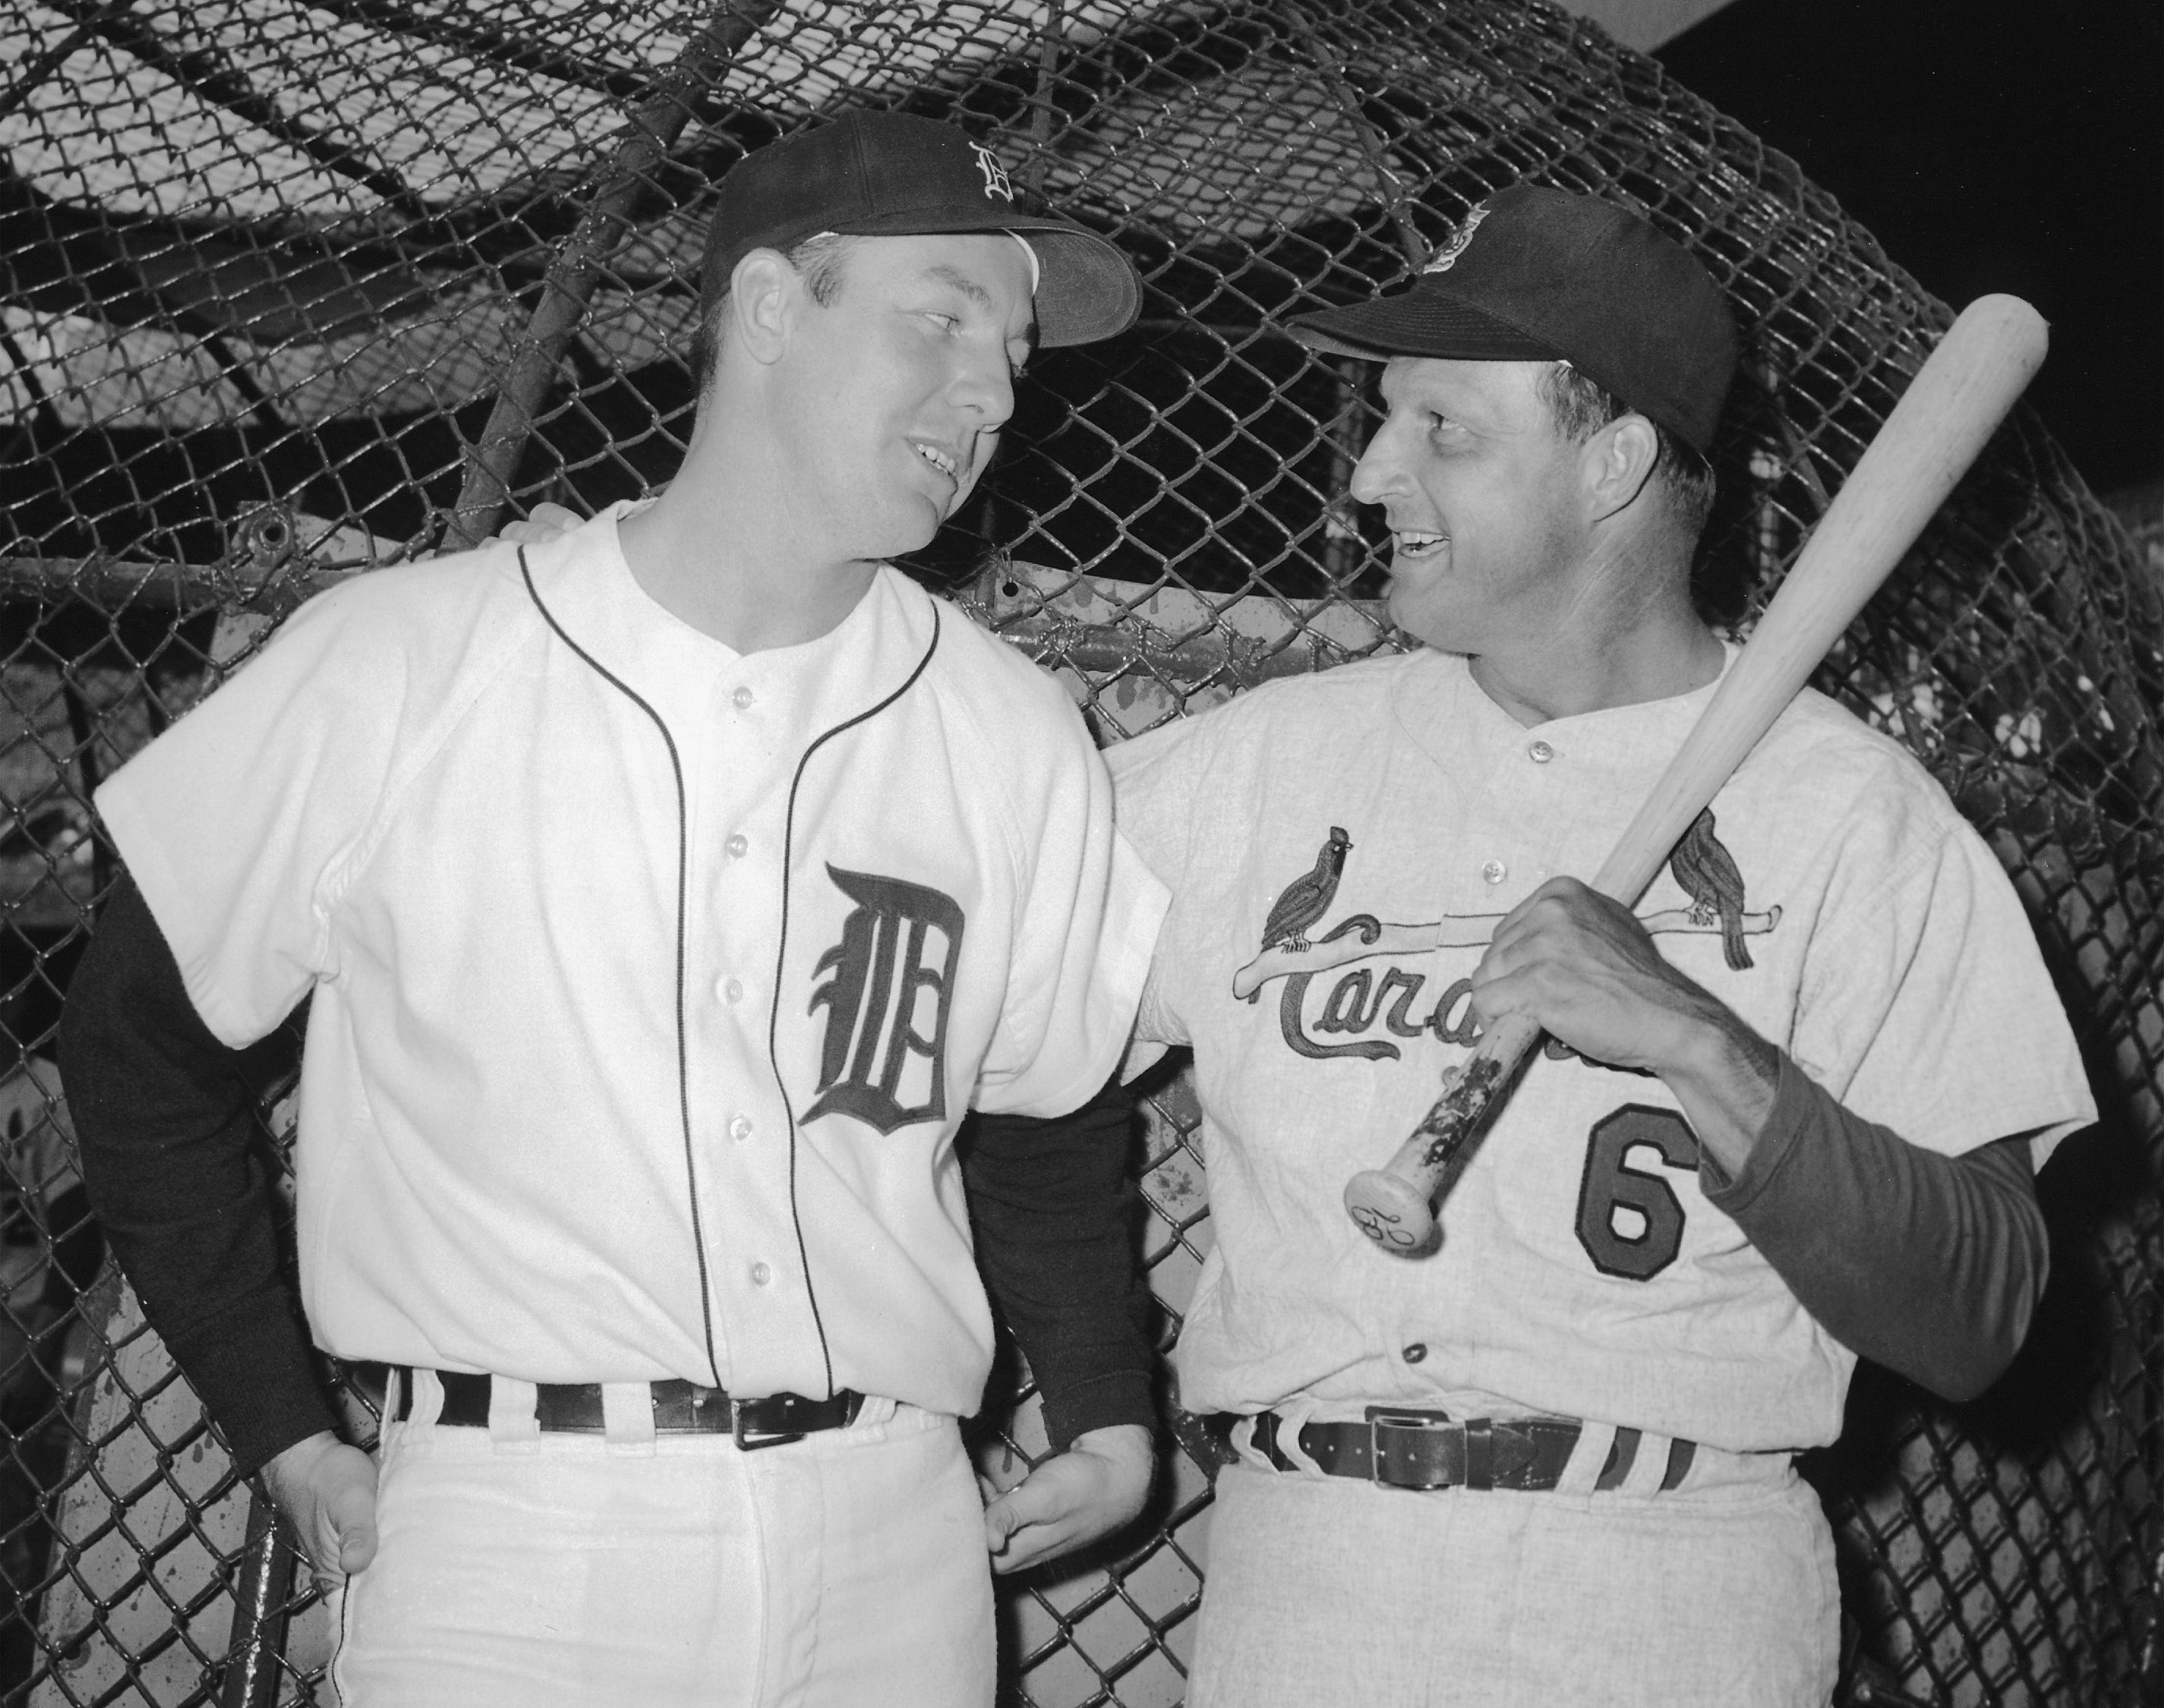 Al Kaline of the Tigers and former Cardinals great Stan Musial talk in the batting cage at Tiger Stadium before an exhibition game between the two teams. Musial, inducted into the Baseball Hall of Fame in 1969, had retired the year before but suited up for the love of the game. Four years later, Kaline would lead the Tigers to their first World Series victory in 23 seasons, batting .379 against those same St. Louis Cardinals.